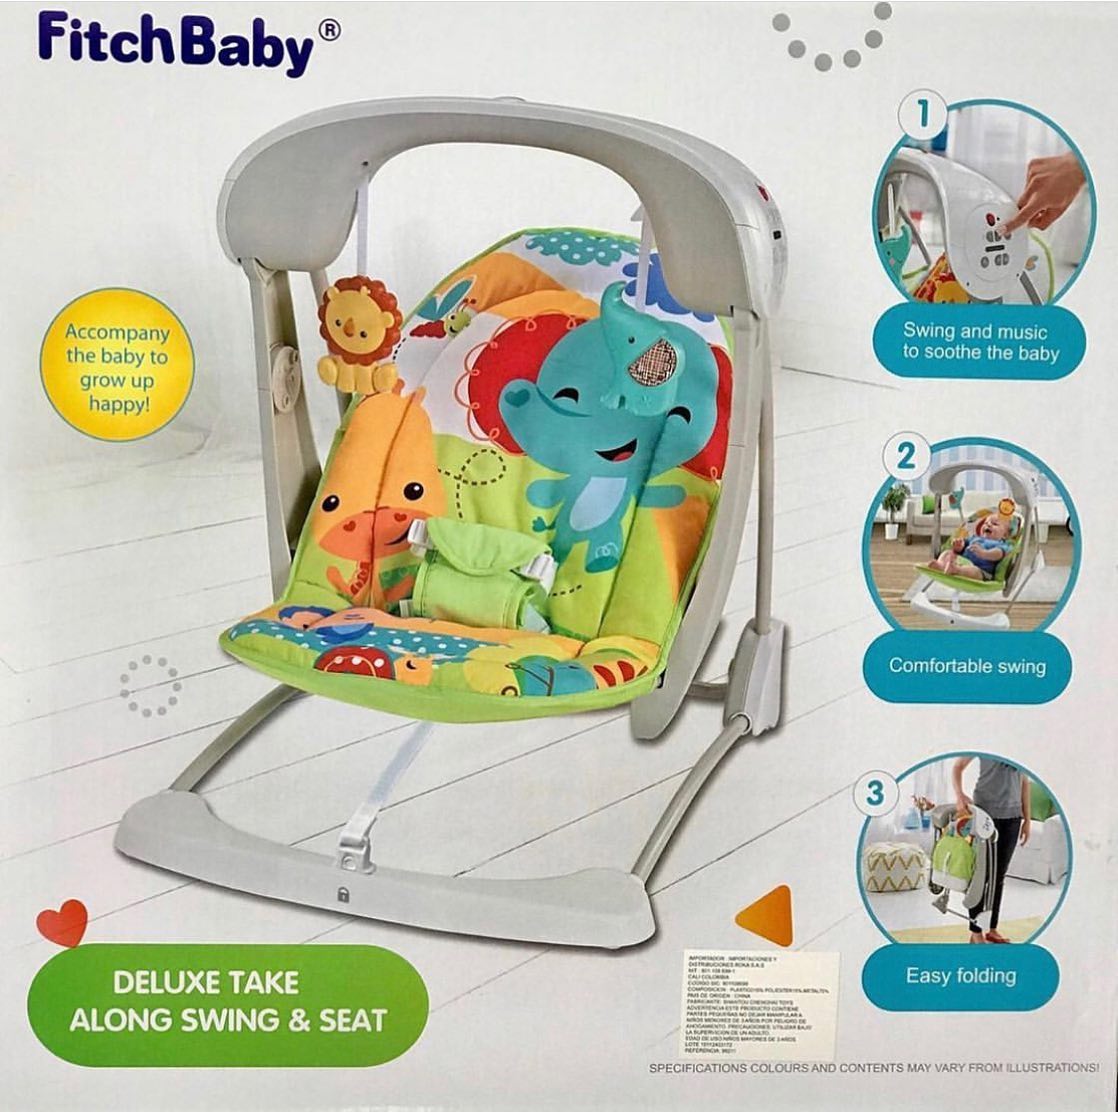 https://yayibusiness.com/wp-content/uploads/2021/06/Rocking-chair-and-swing-Fitch-Baby_2.jpg